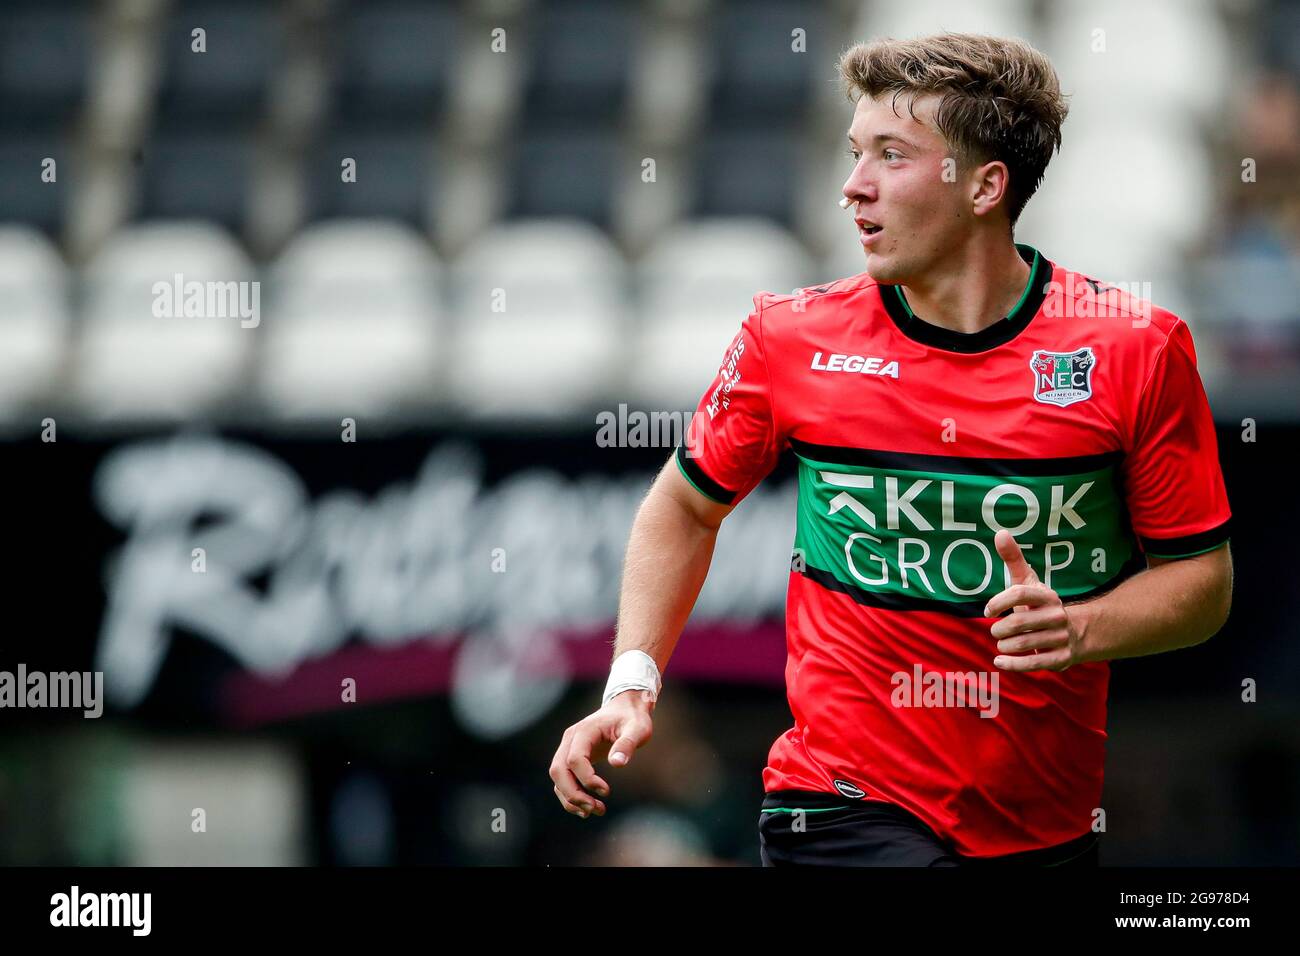 ALMELO, NETHERLANDS - JULY 24: Ole Romeny of NEC with nose plug during the Preseason Friendly Match match between Heracles Almelo and NEC at Erve Asito on July 24, 2021 in Almelo, Netherlands (Photo by Broer van den Boom/Orange Pictures) Stock Photo